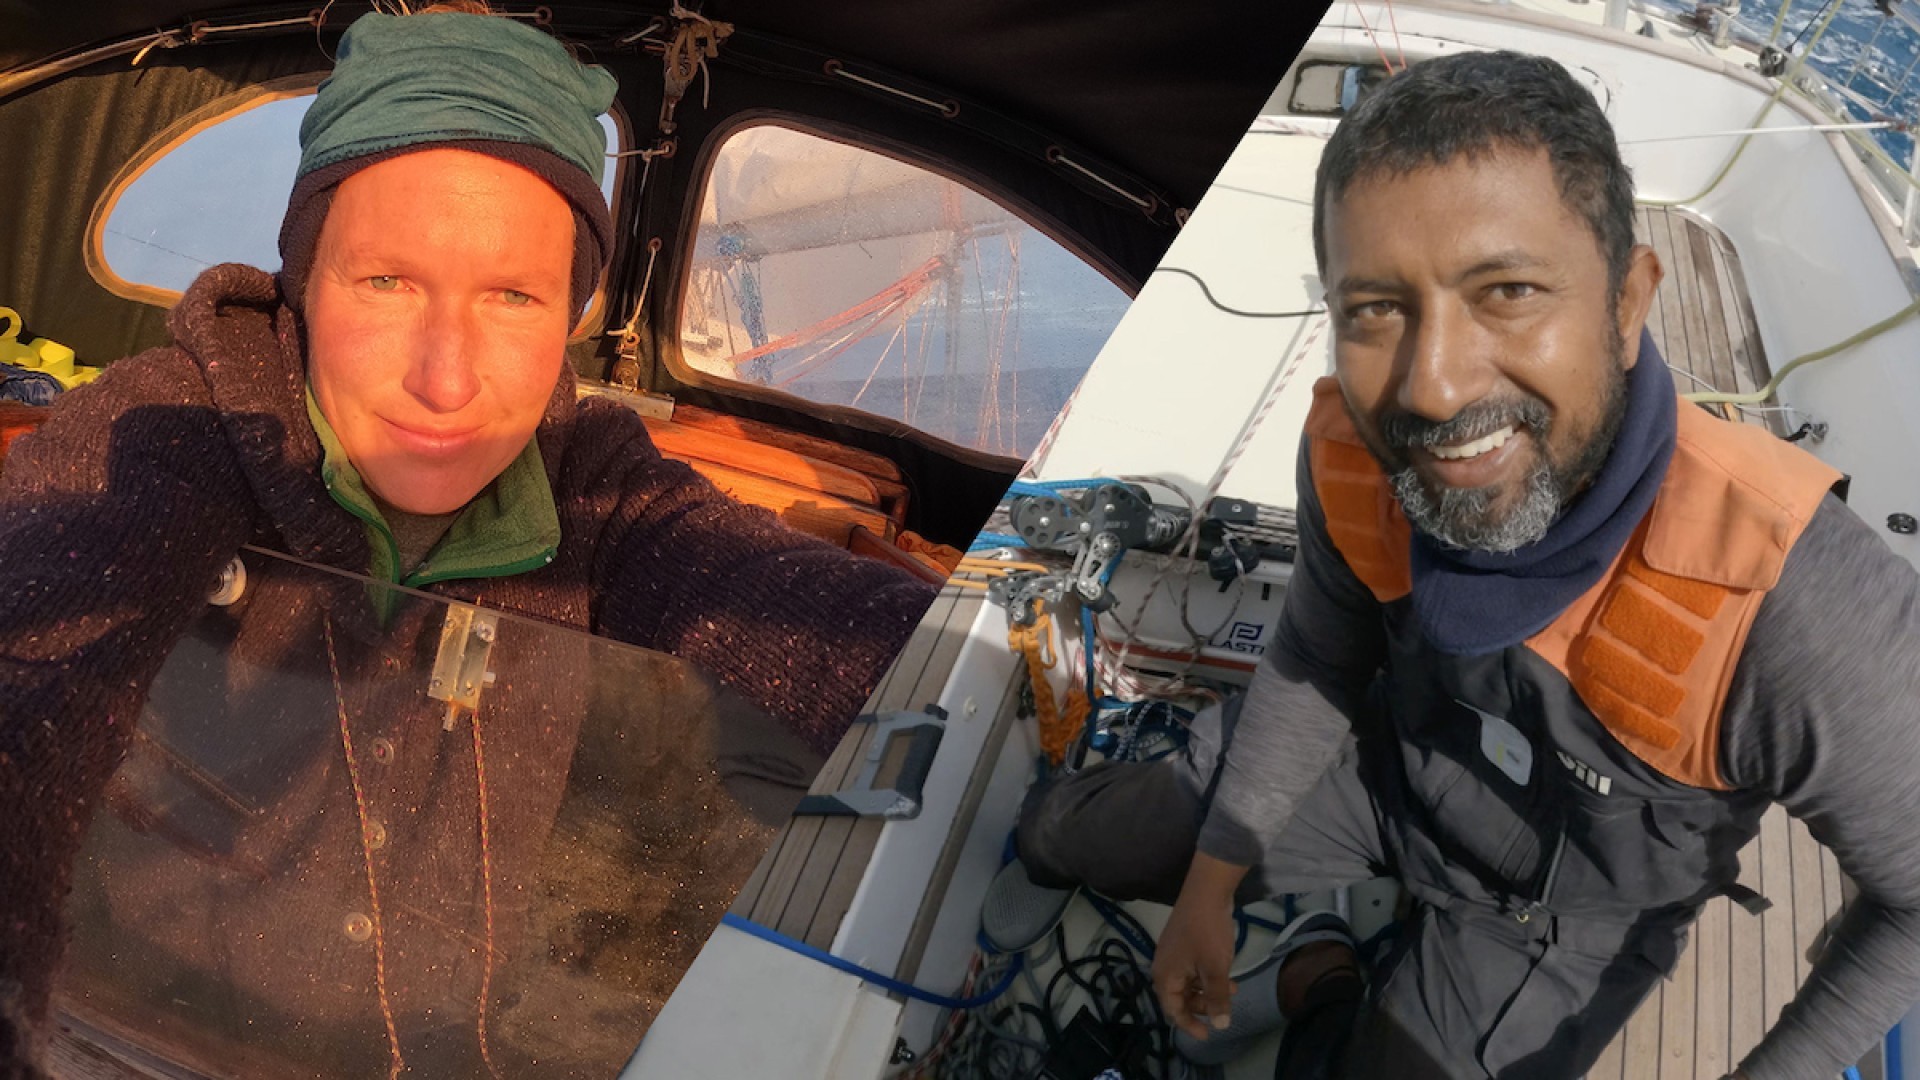 228 days from the start with just one week till the finish in Les Sables d'Olonne with 29.000 miles under the keel, Abhilash Tomy (IND) BAYANAT and Kirsten Neuschäfer (ZAF) are now separated by only a few miles. @GGR2022